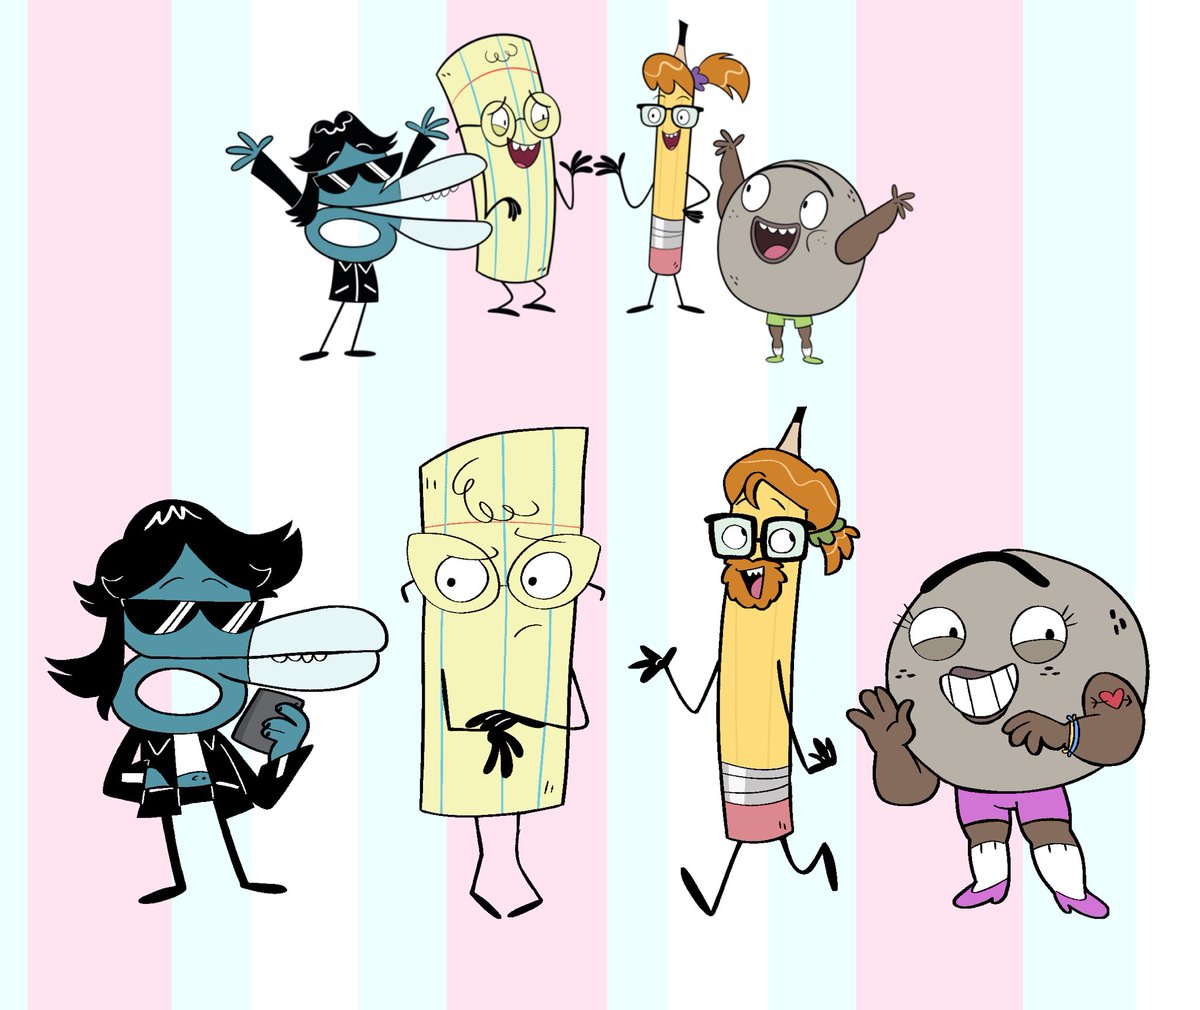 rock paper scissors but they all transitioned #rockpaperscissors #genderbent